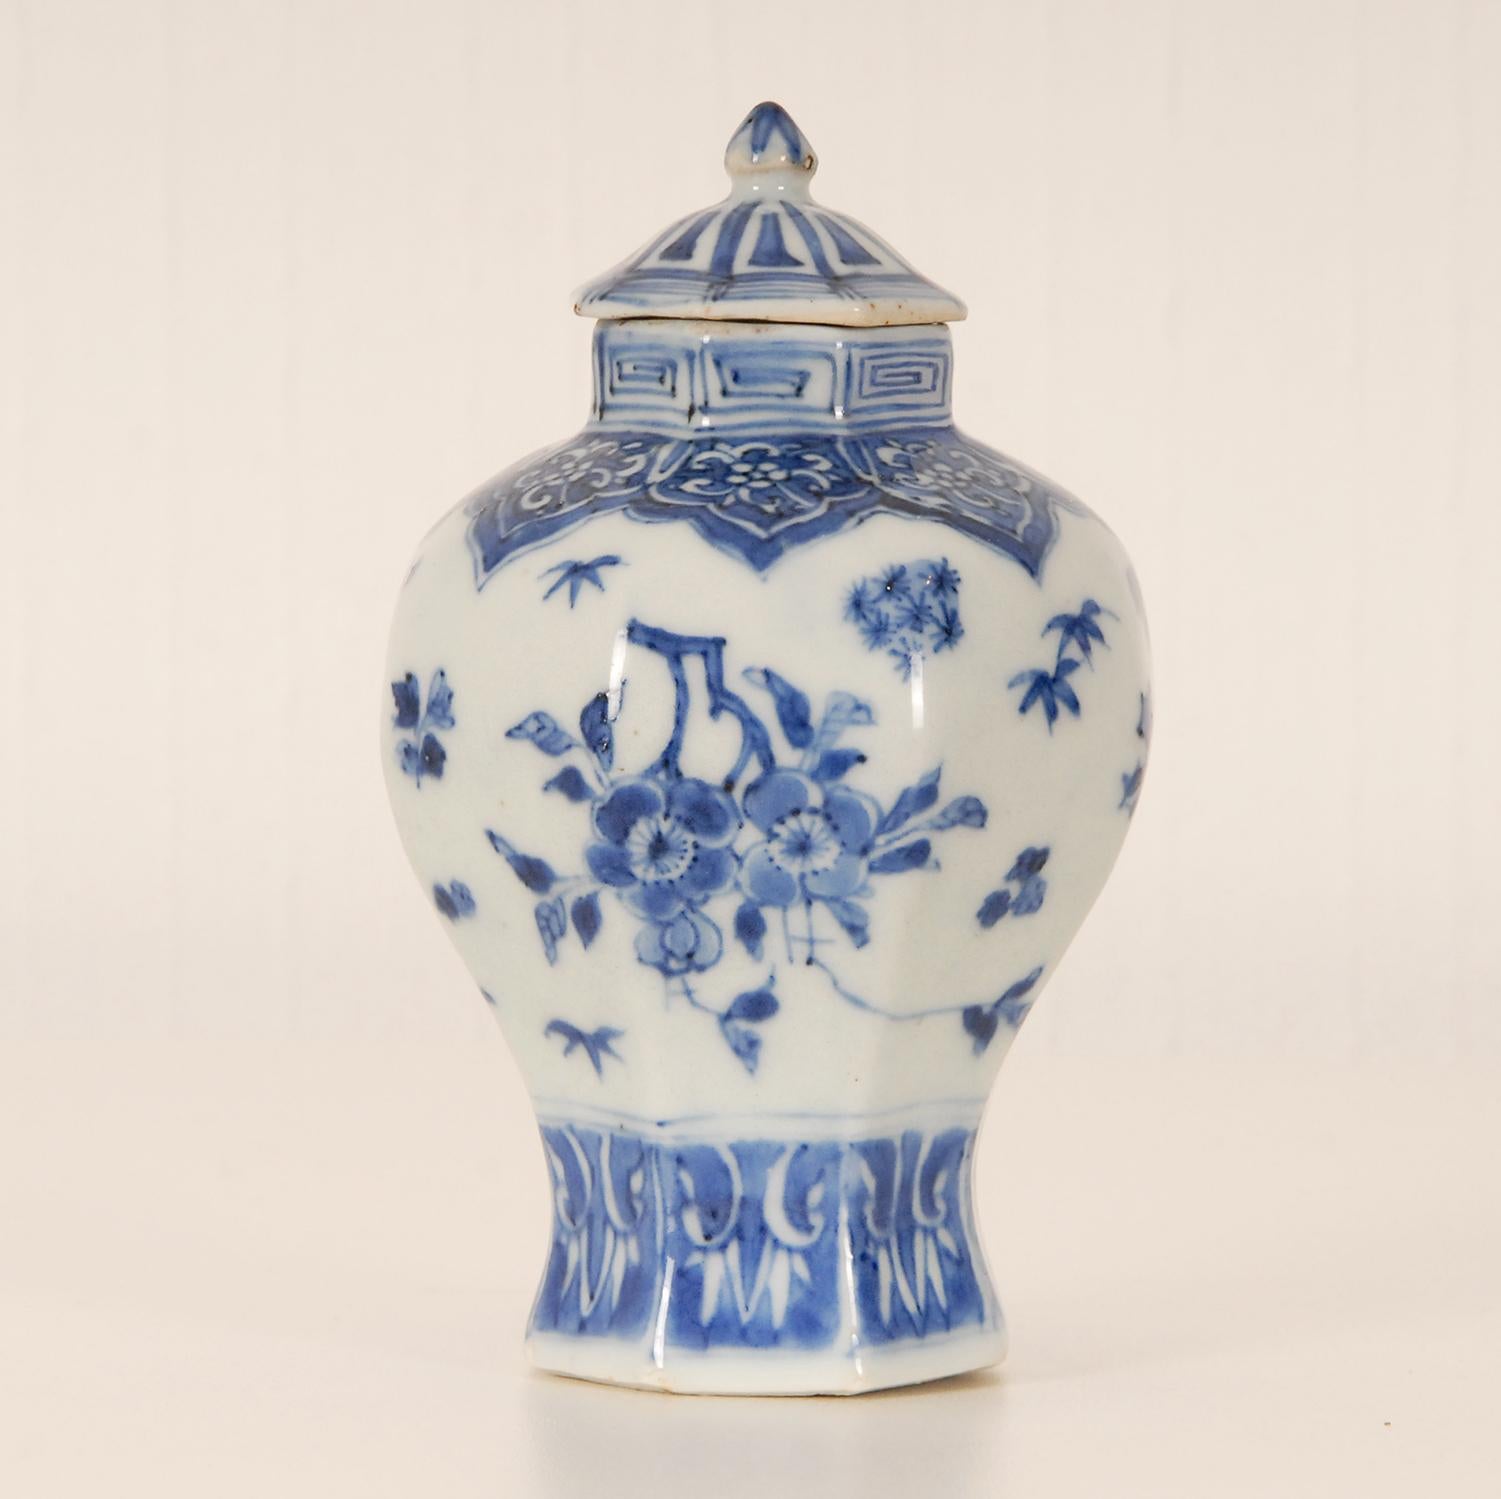 Antique 17th Century Chinese porcelain - Ceramic covered vase
Origin: China, Period Late Ming, approx 1630 - 1645
Form - Octagonal baluster vase - jar with cover
Color: Blue and White
Fully hand crafted and hand decorated with scattered flower